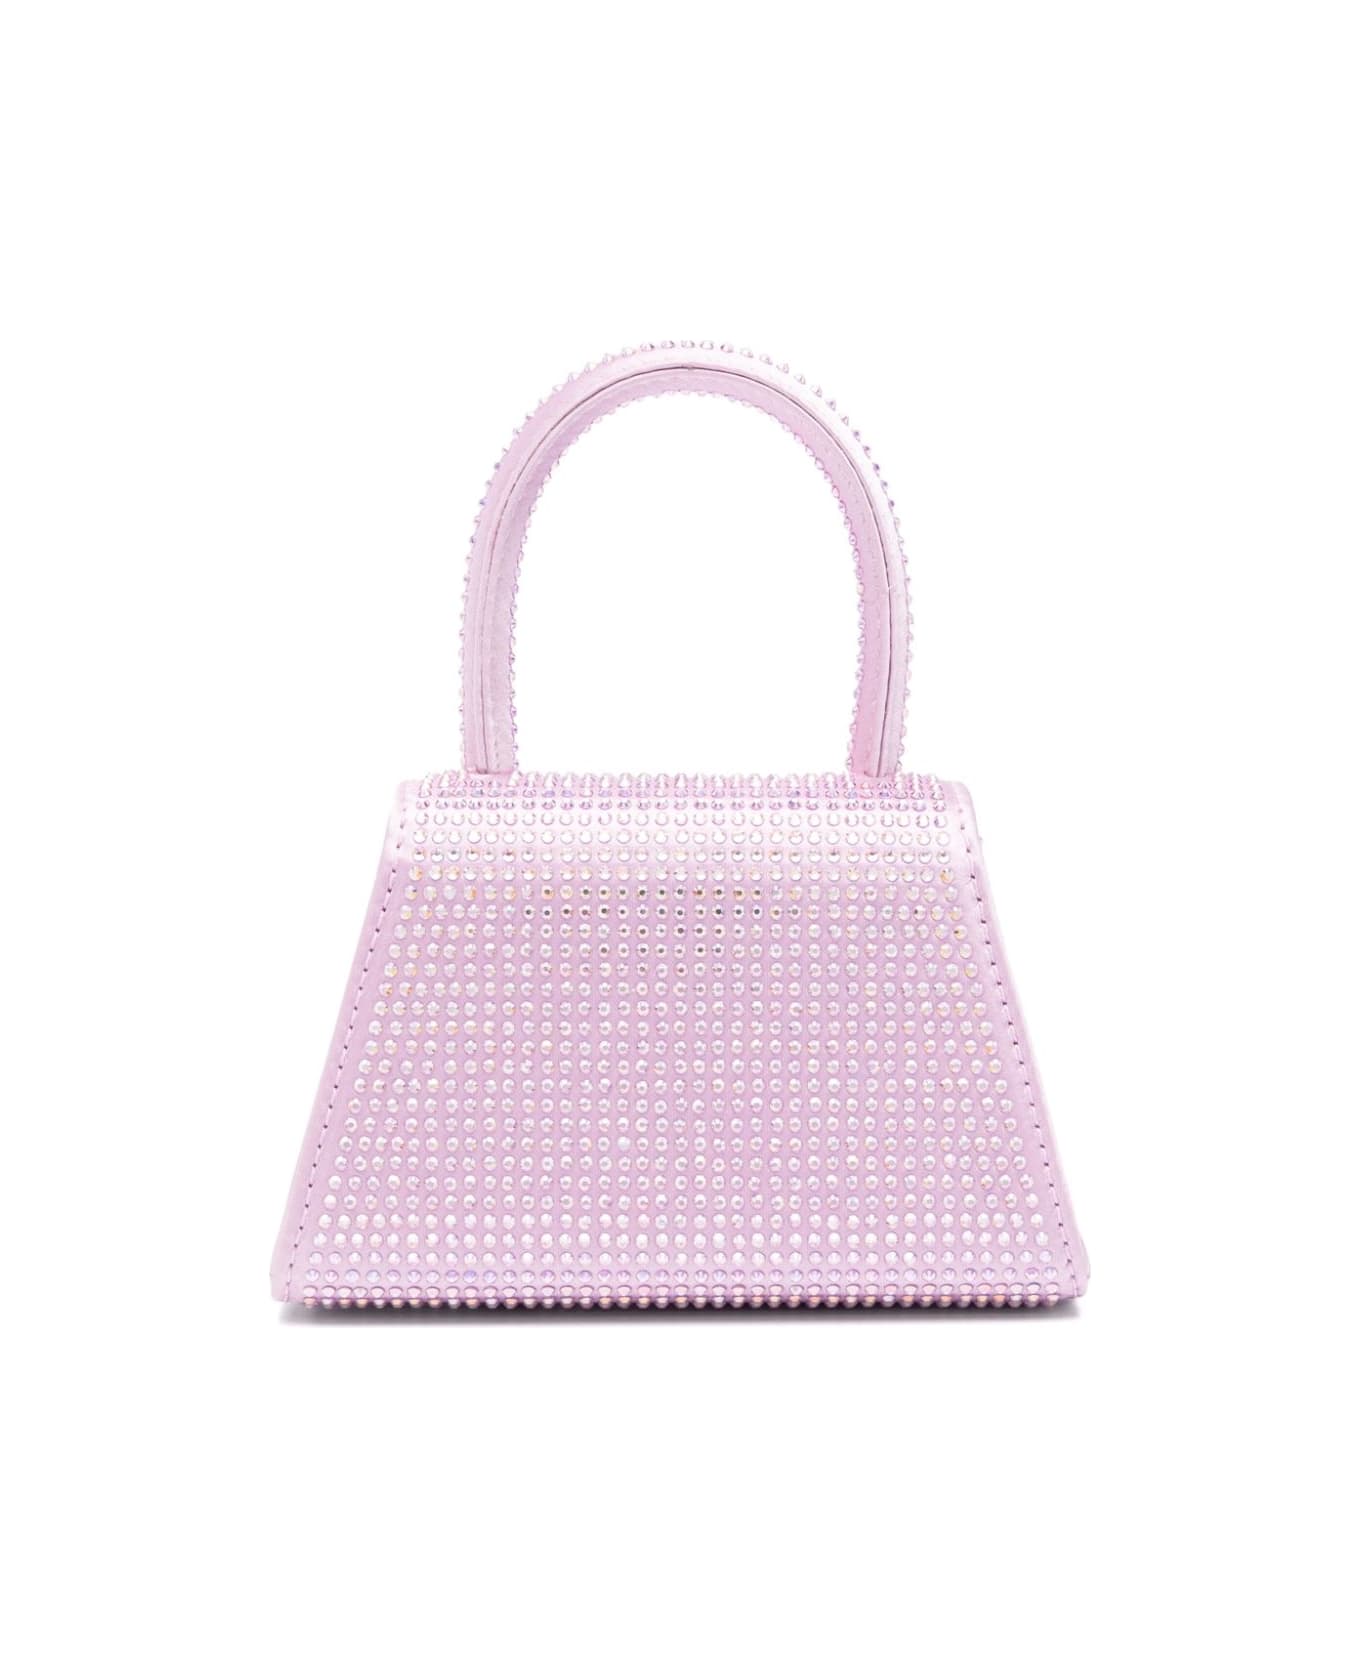 self-portrait Mini Bag With Bow - Pink